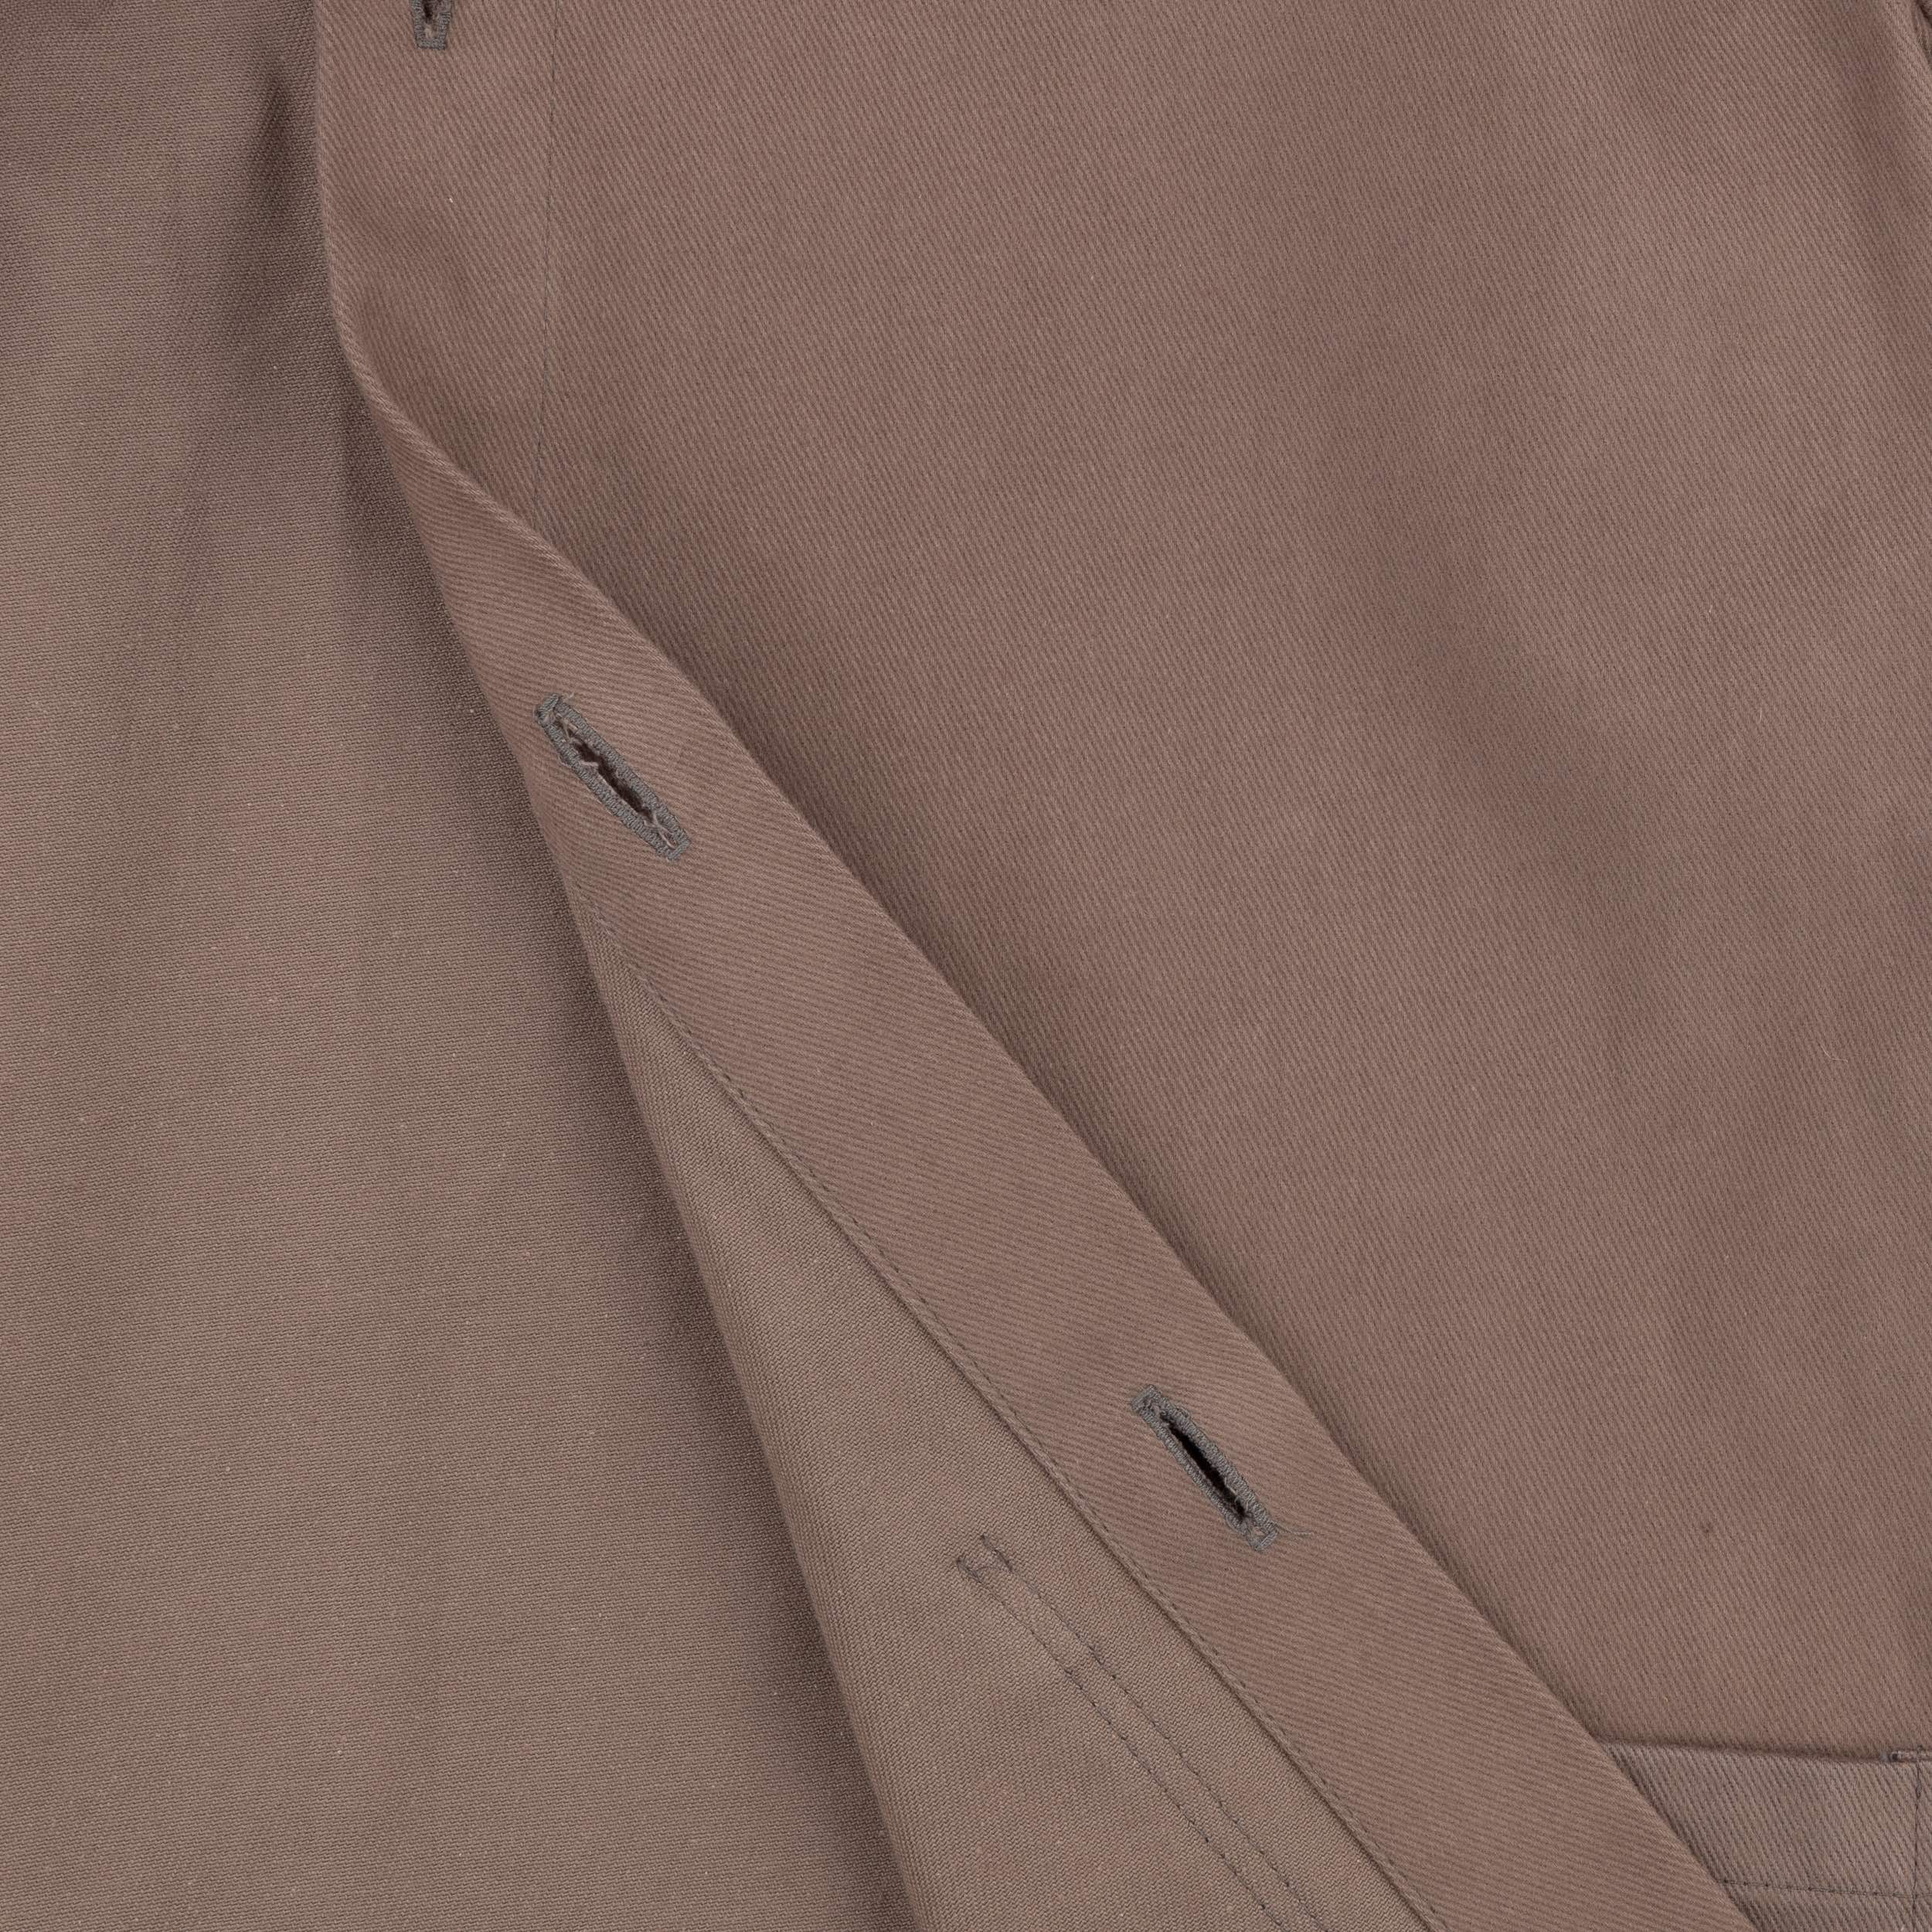 Close up of the button seam of the Carrier Company Draught Jacket